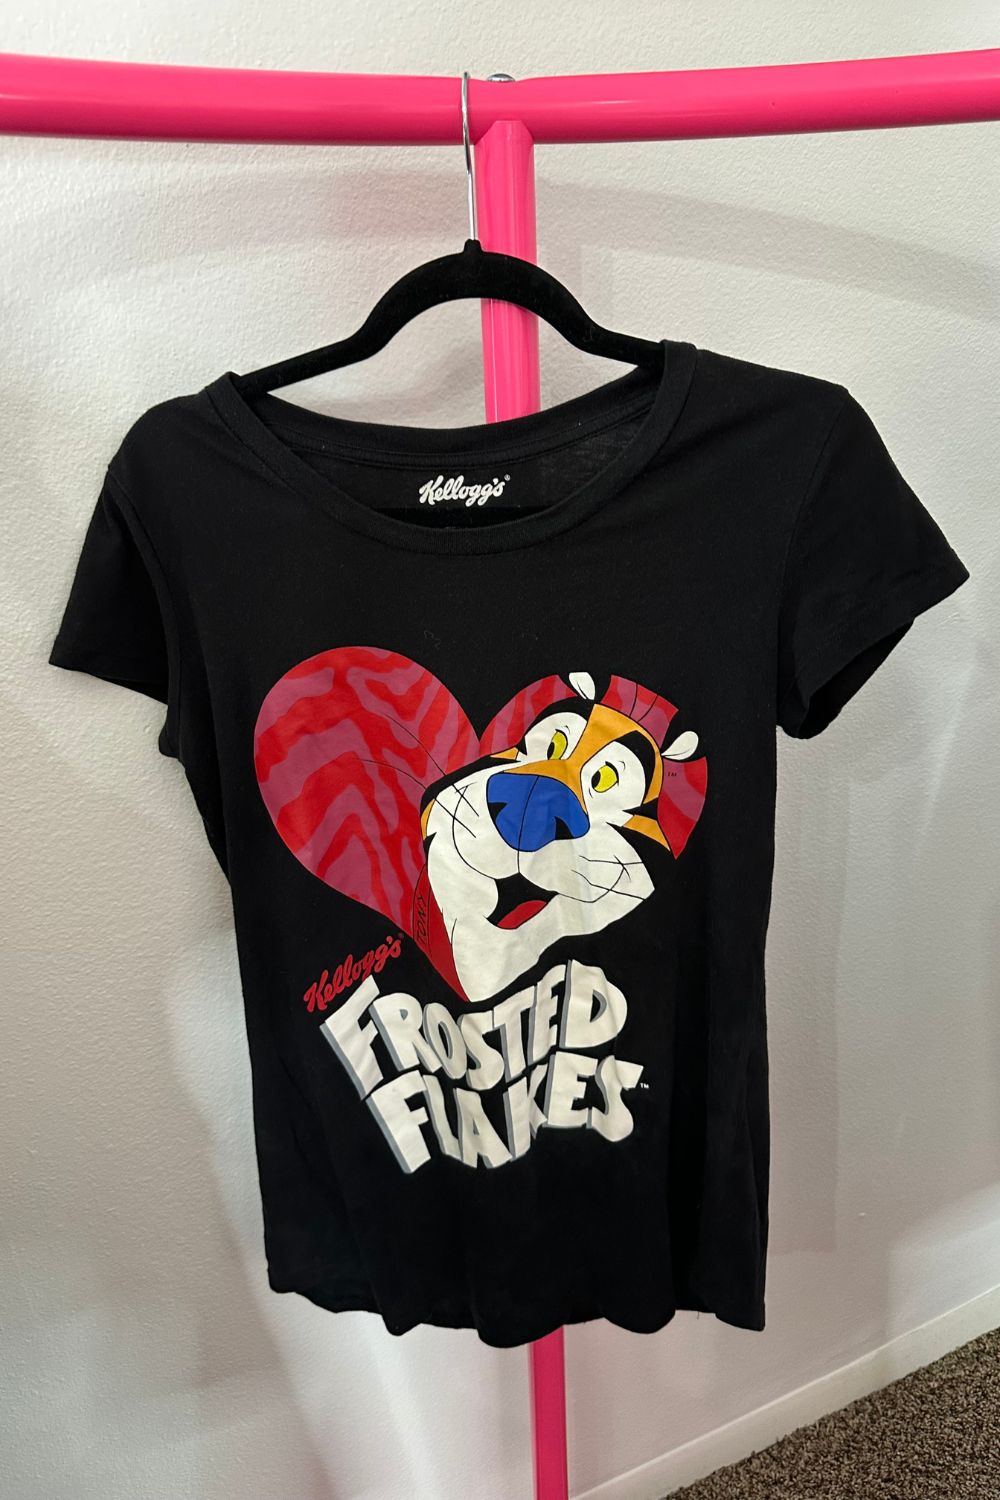 2012 KELLOGG FROSTED FLAKES TEE - SIZE M*